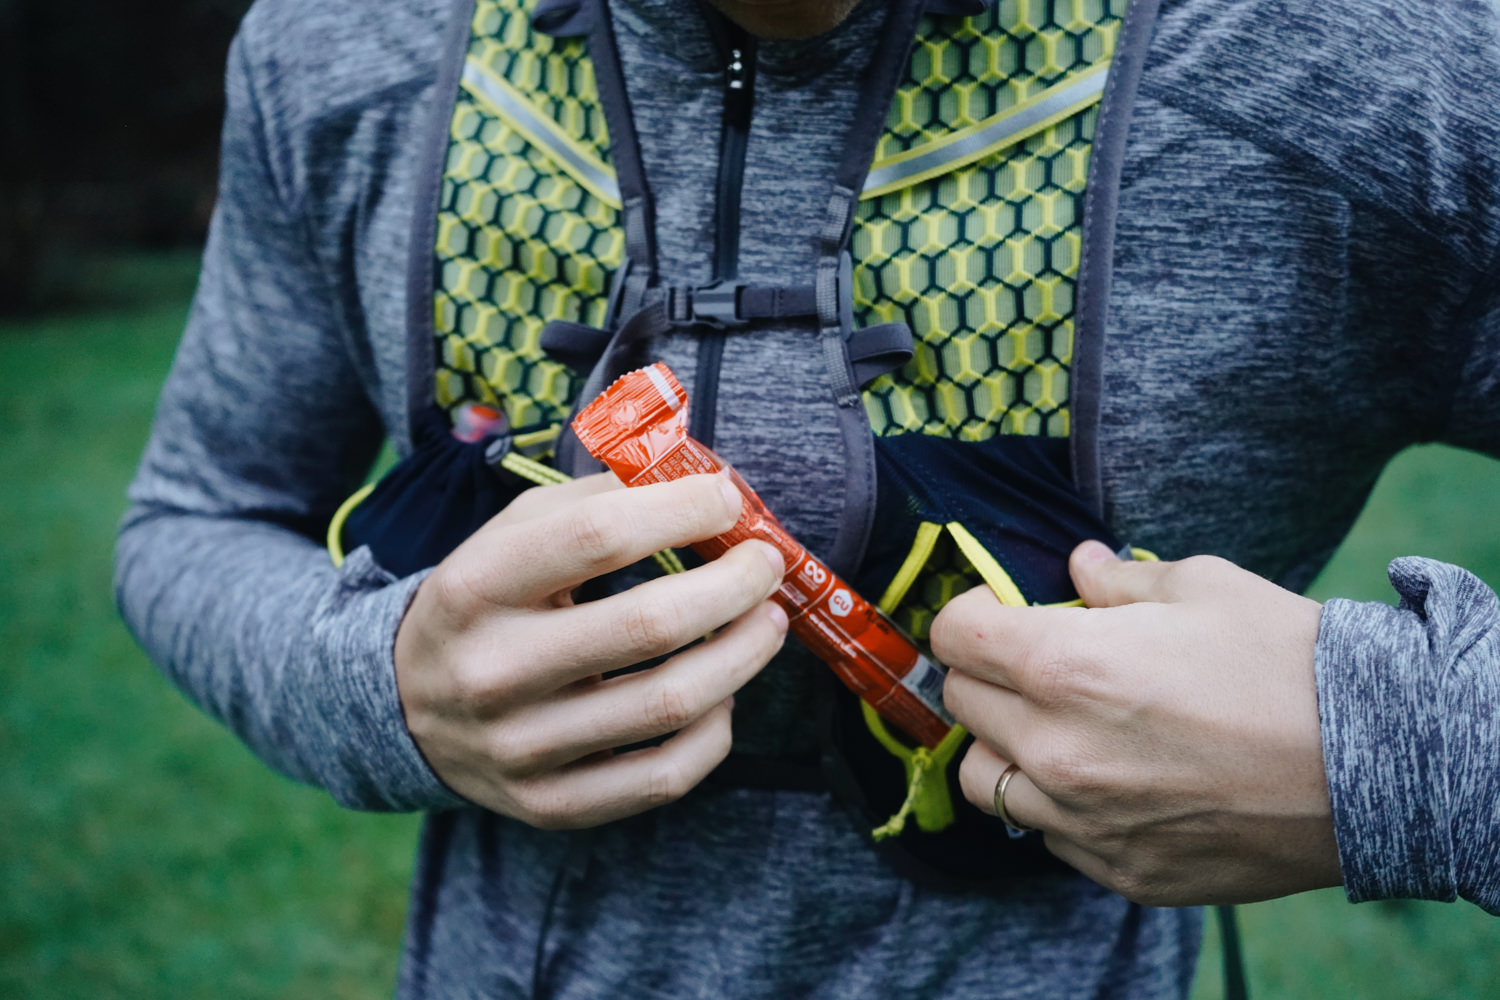 We look for running vests with good pockets for stashing snacks.